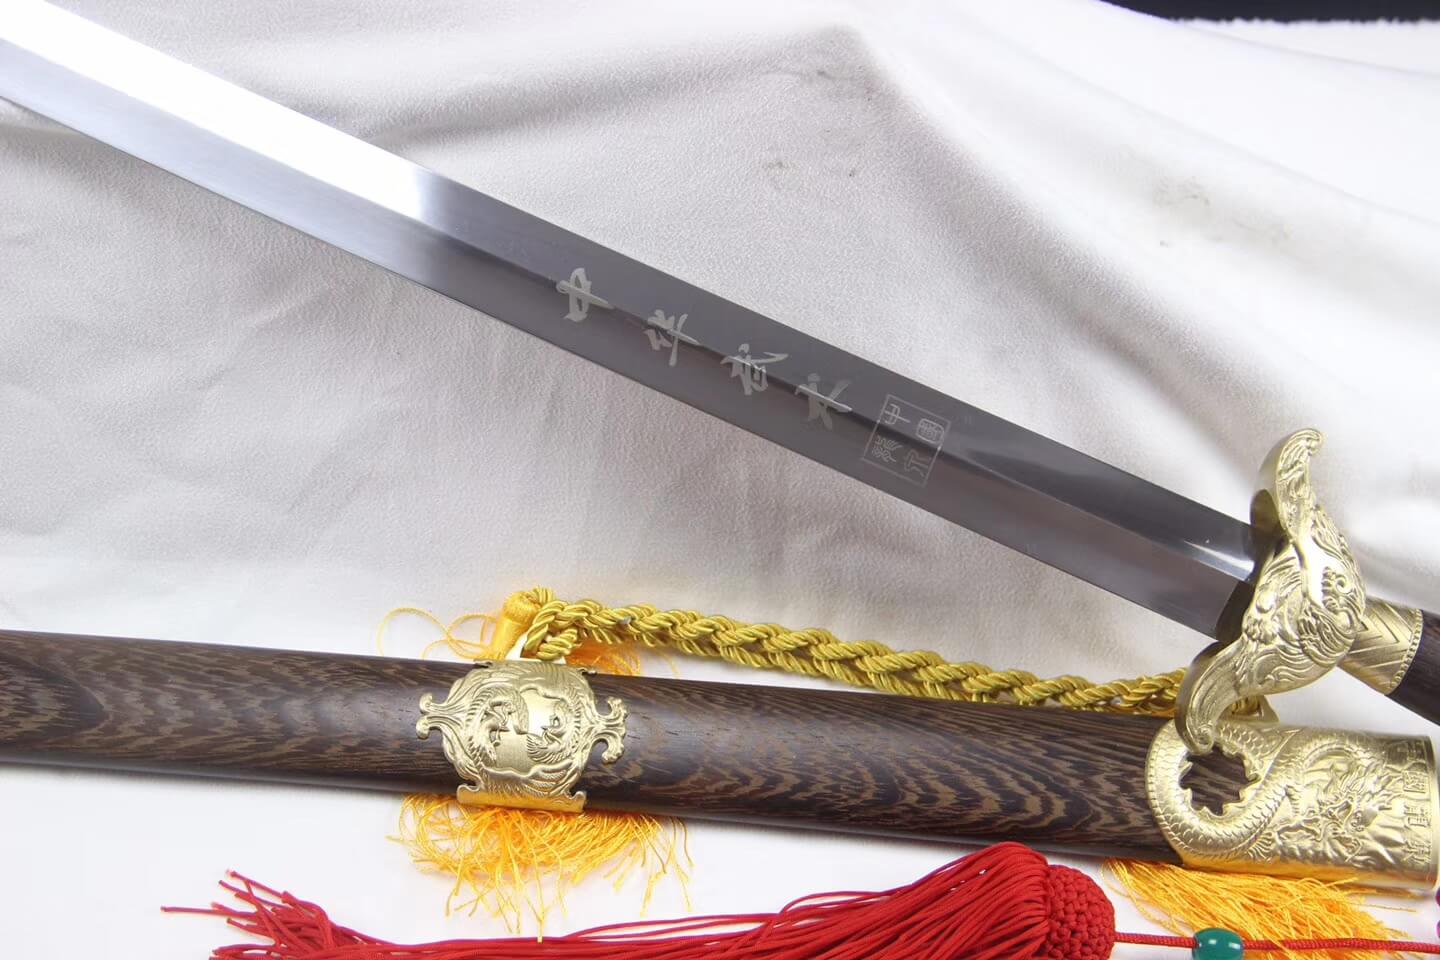 Training sword,Longfeng jian,Stainless steel,Rosewood,Brass fittings - Chinese sword shop